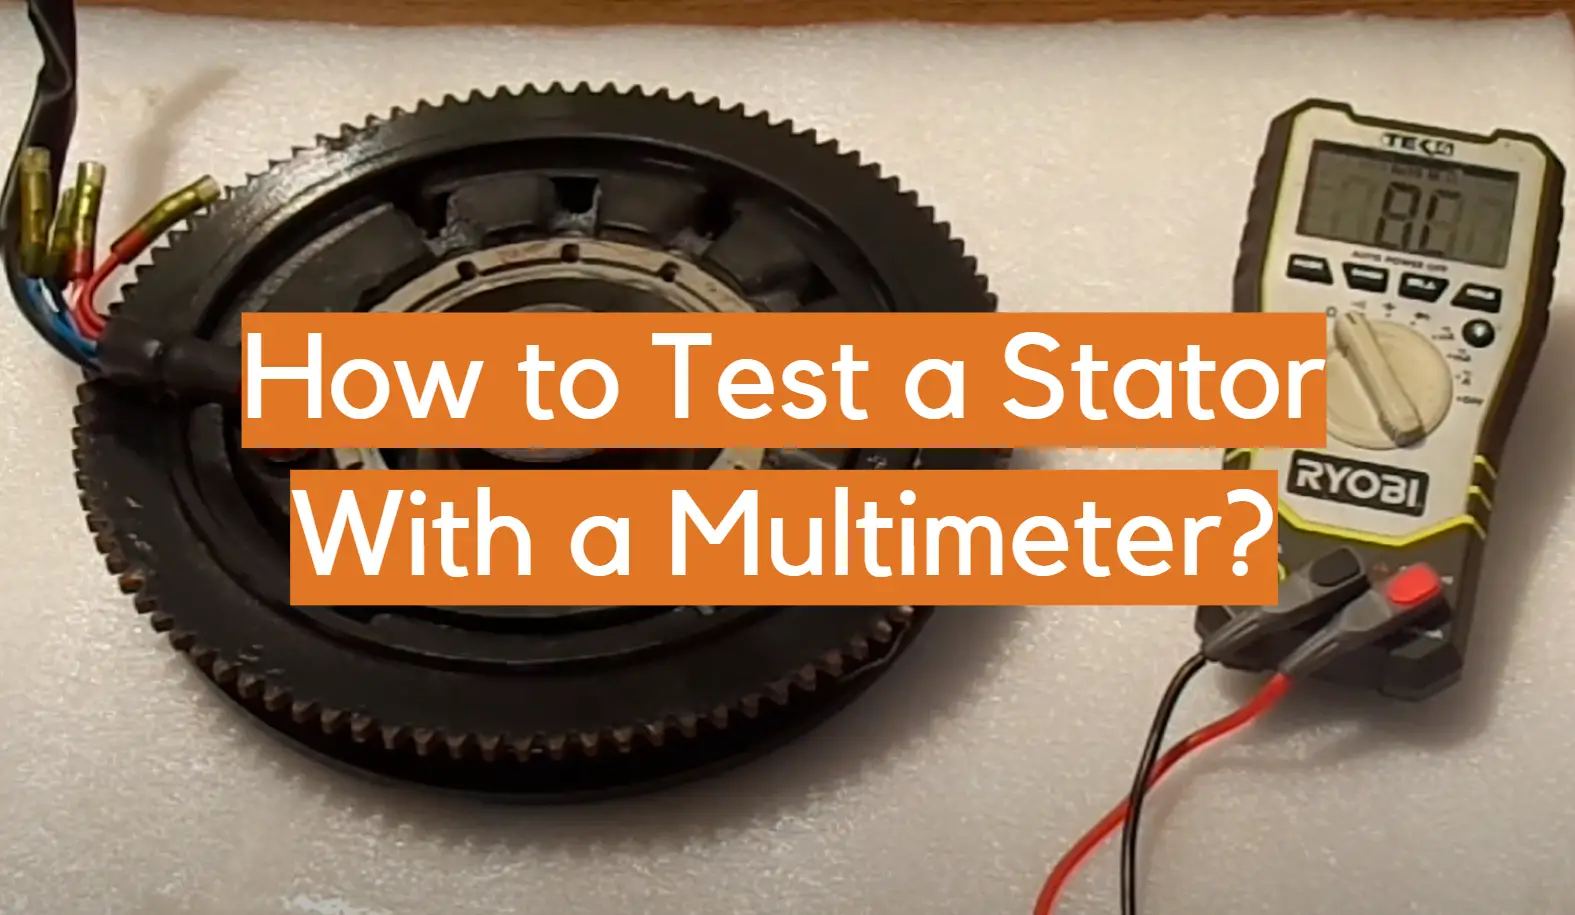 How to Test a Stator With a Multimeter?